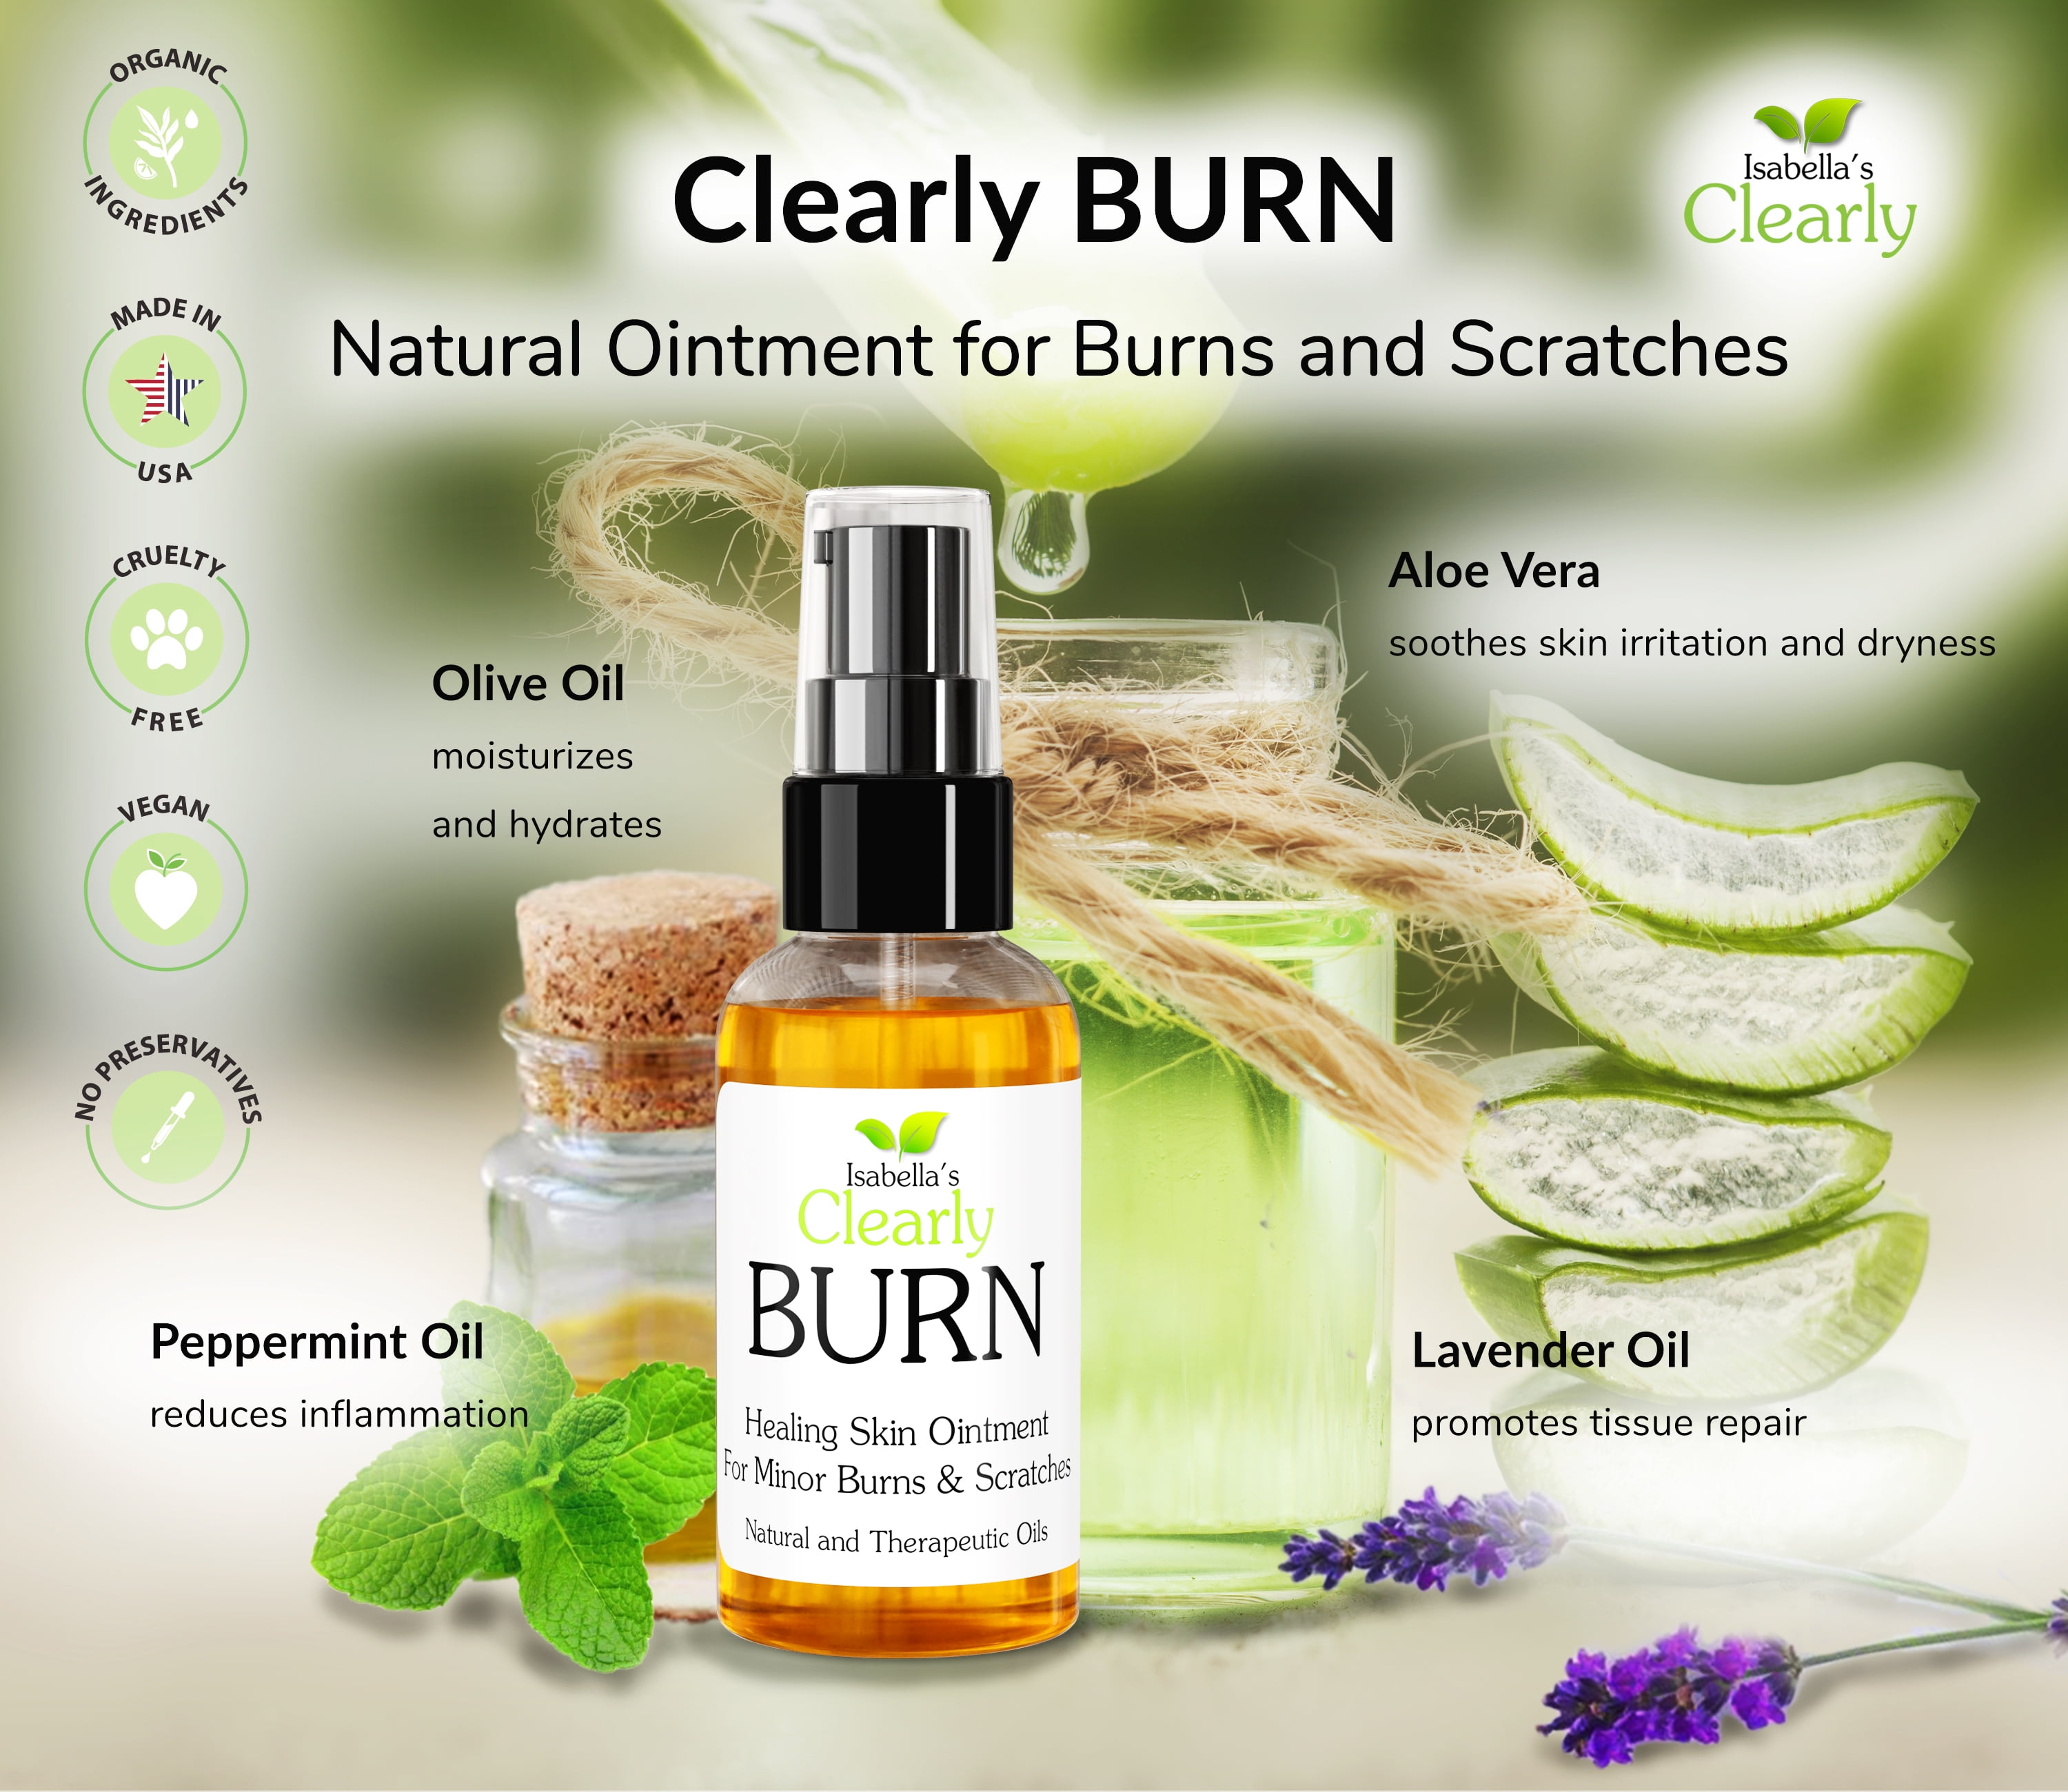 Clearly BURN Soothing Ointment | Soothe Skin Burns, Scratches, Scalds,  Sunburn, Scars, Rashes with Olive Oil, Lavender and Aloe Vera | Fast Acting